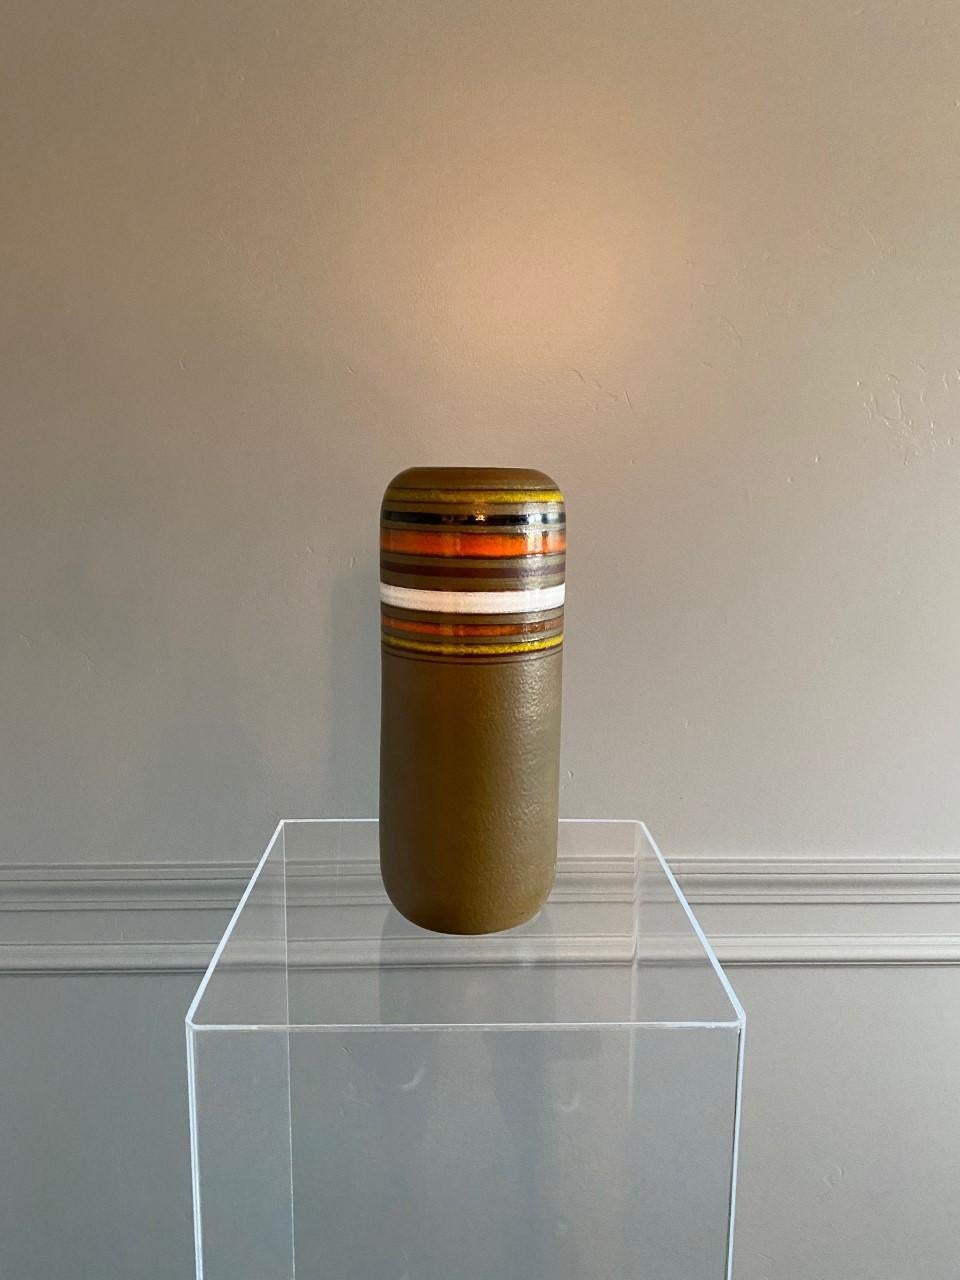 Created by Bitossi’s creative director, Aldo Londi and distributed worldwide by Rosenthal Netter. Midcentury Italian art pottery vase by Rosenthal Netter for Bitossi. Undeniably midcentury classic piece. Cylindrical vase with a classic palette